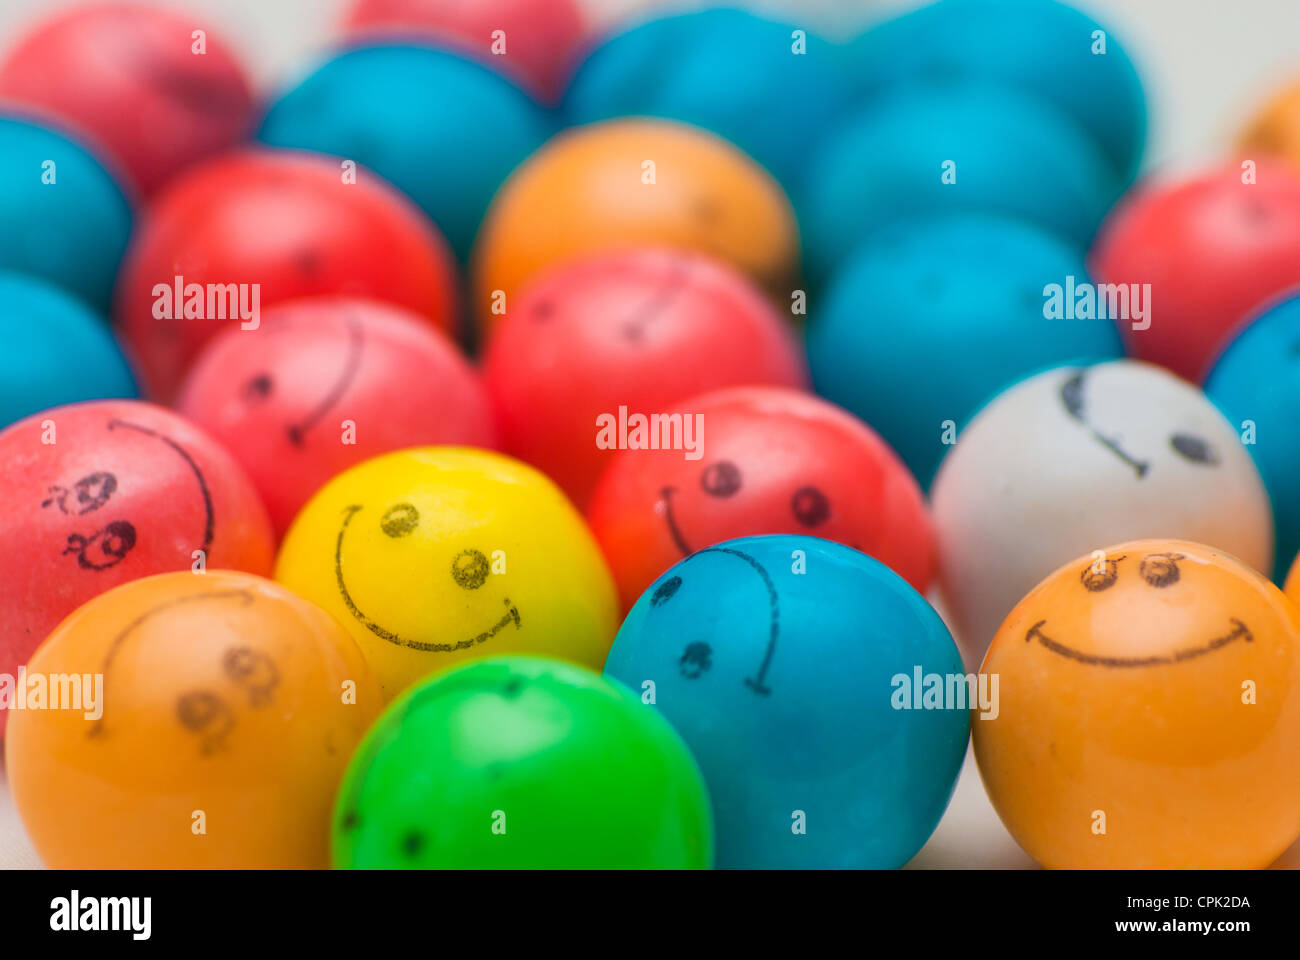 A large group of colorful balls with smiley faces on them. Stock Photo